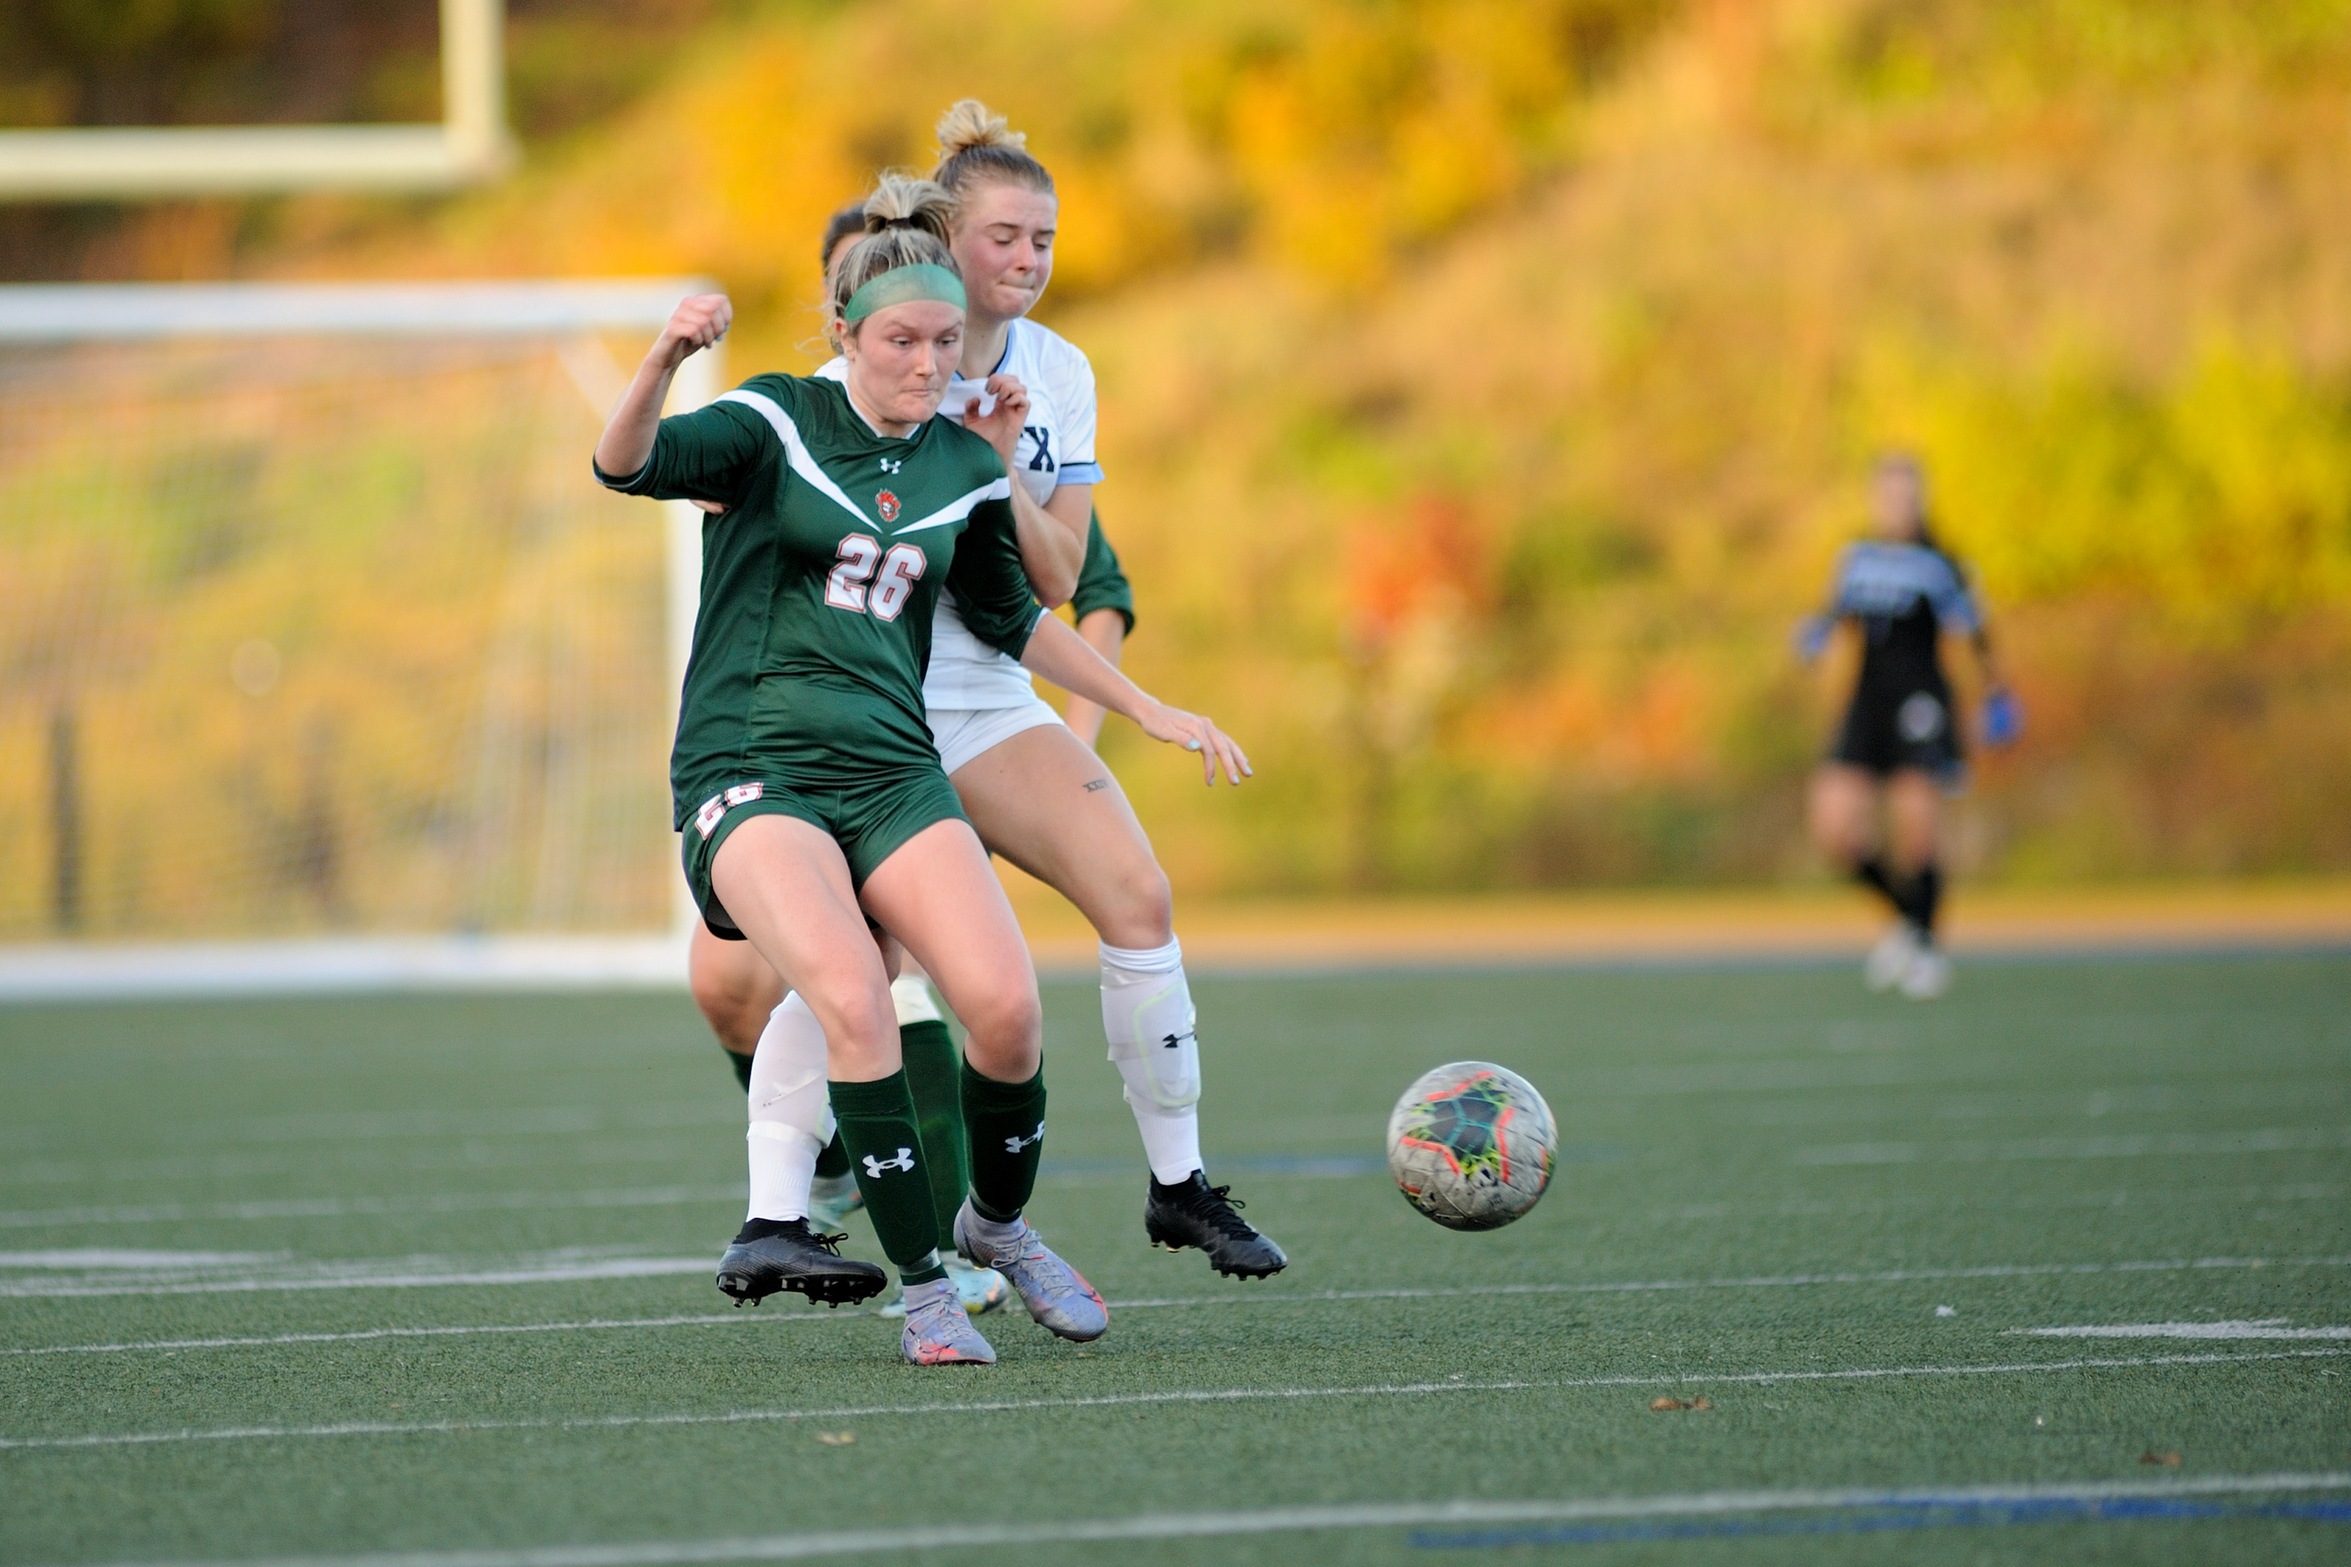 The U SPORTS No. 10 ranked Cape Breton Capers earned a 2-1 victory over the No. 8 ranked STFX X-Women